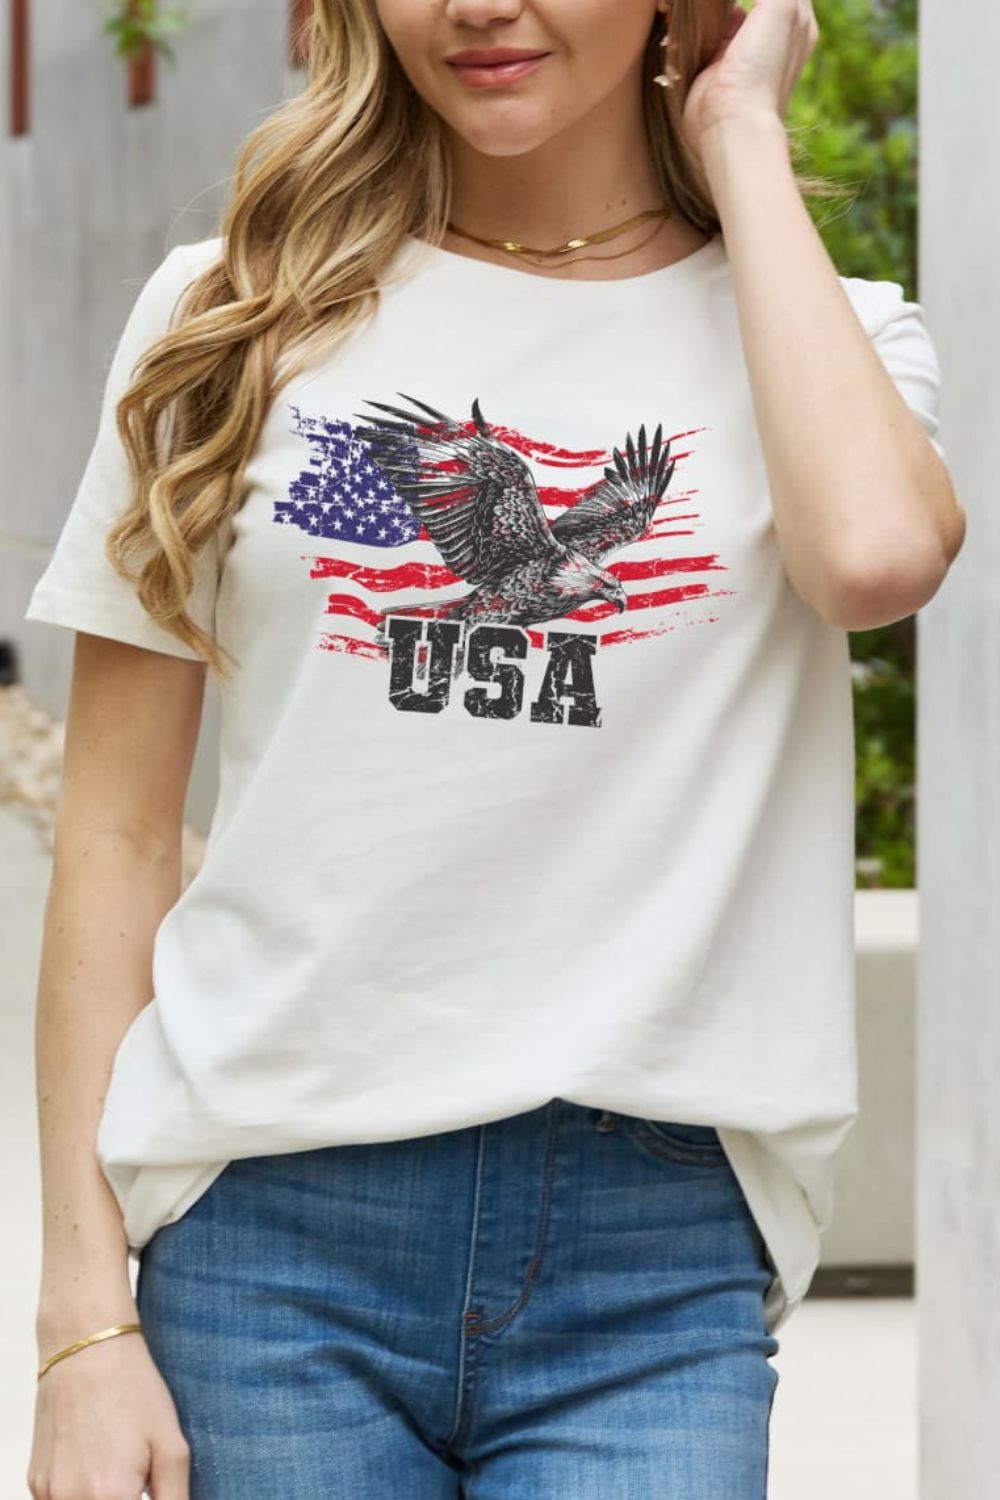 Simply Love USA Star and Stripe Eagle Graphic Cotton Tee